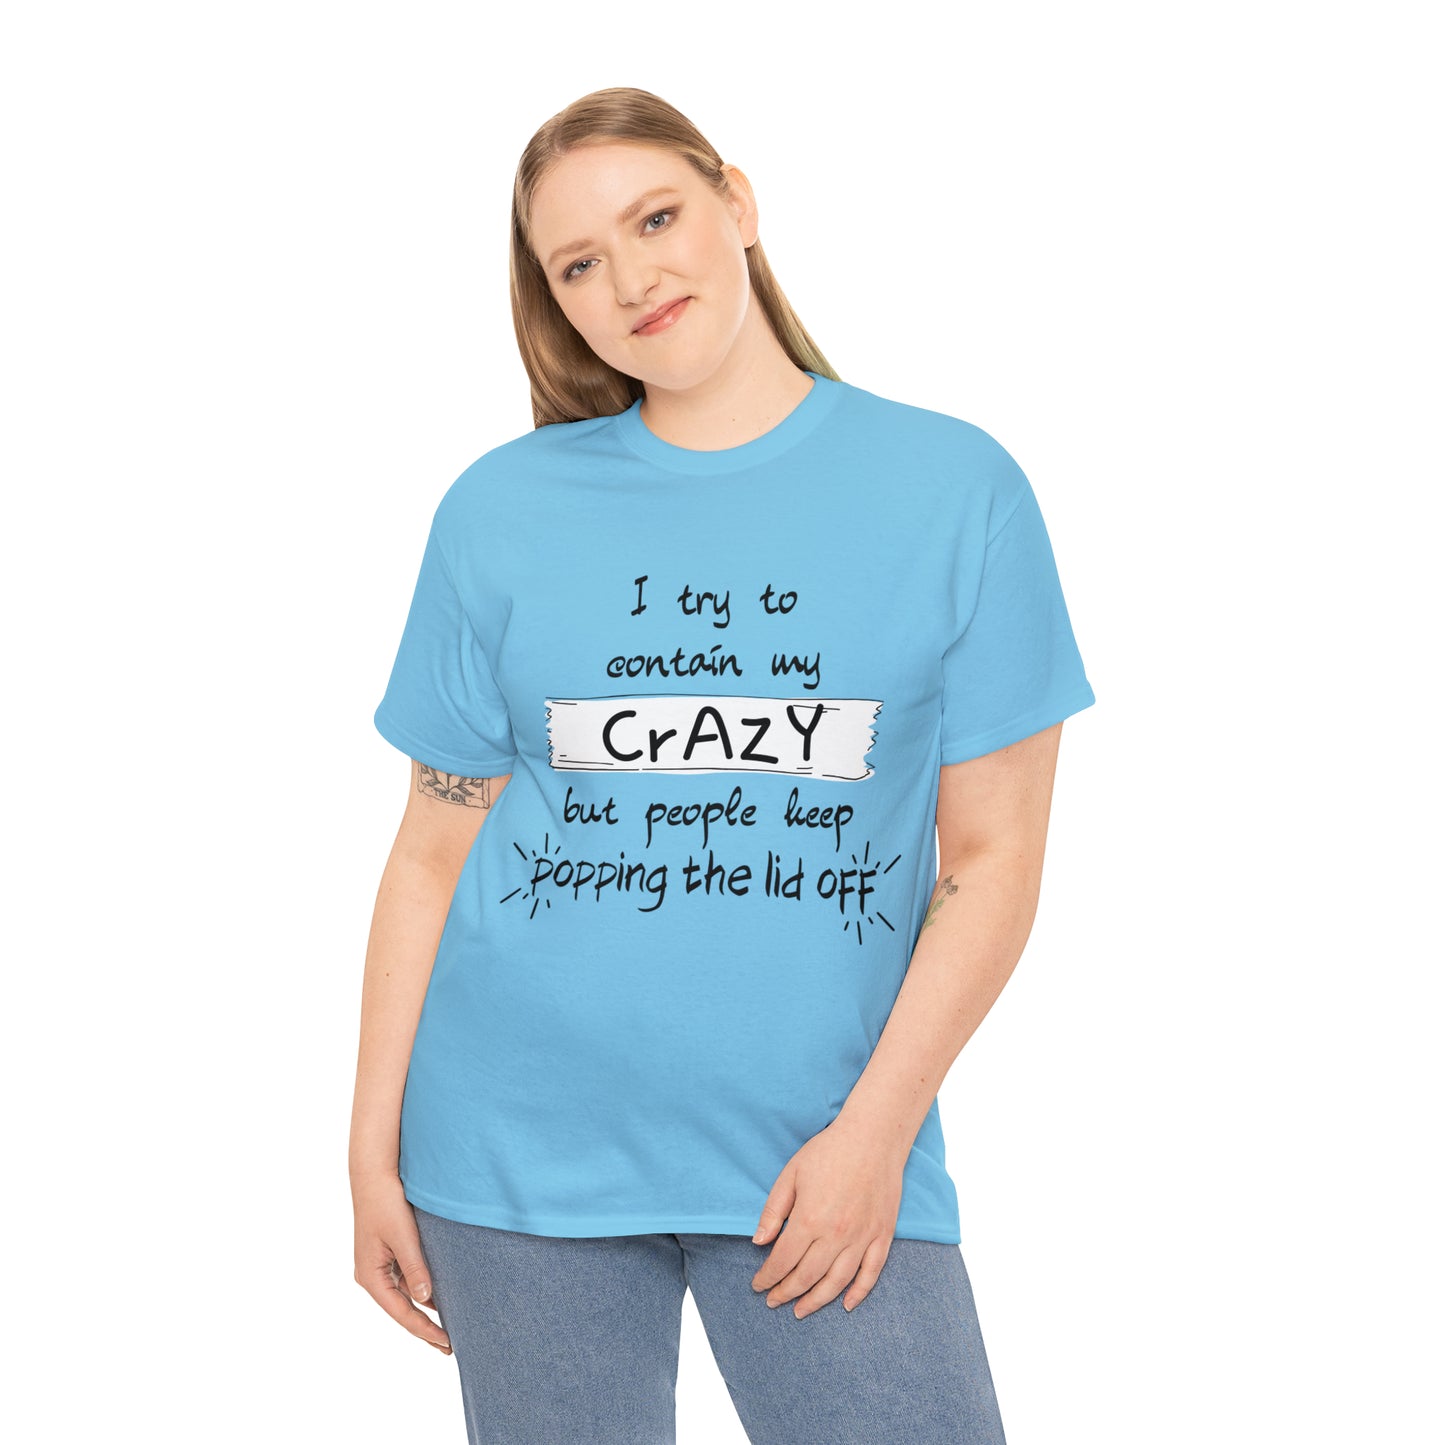 I keep trying to contain my crazy but people keep popping the lid off - Unisex Heavy Cotton Tee